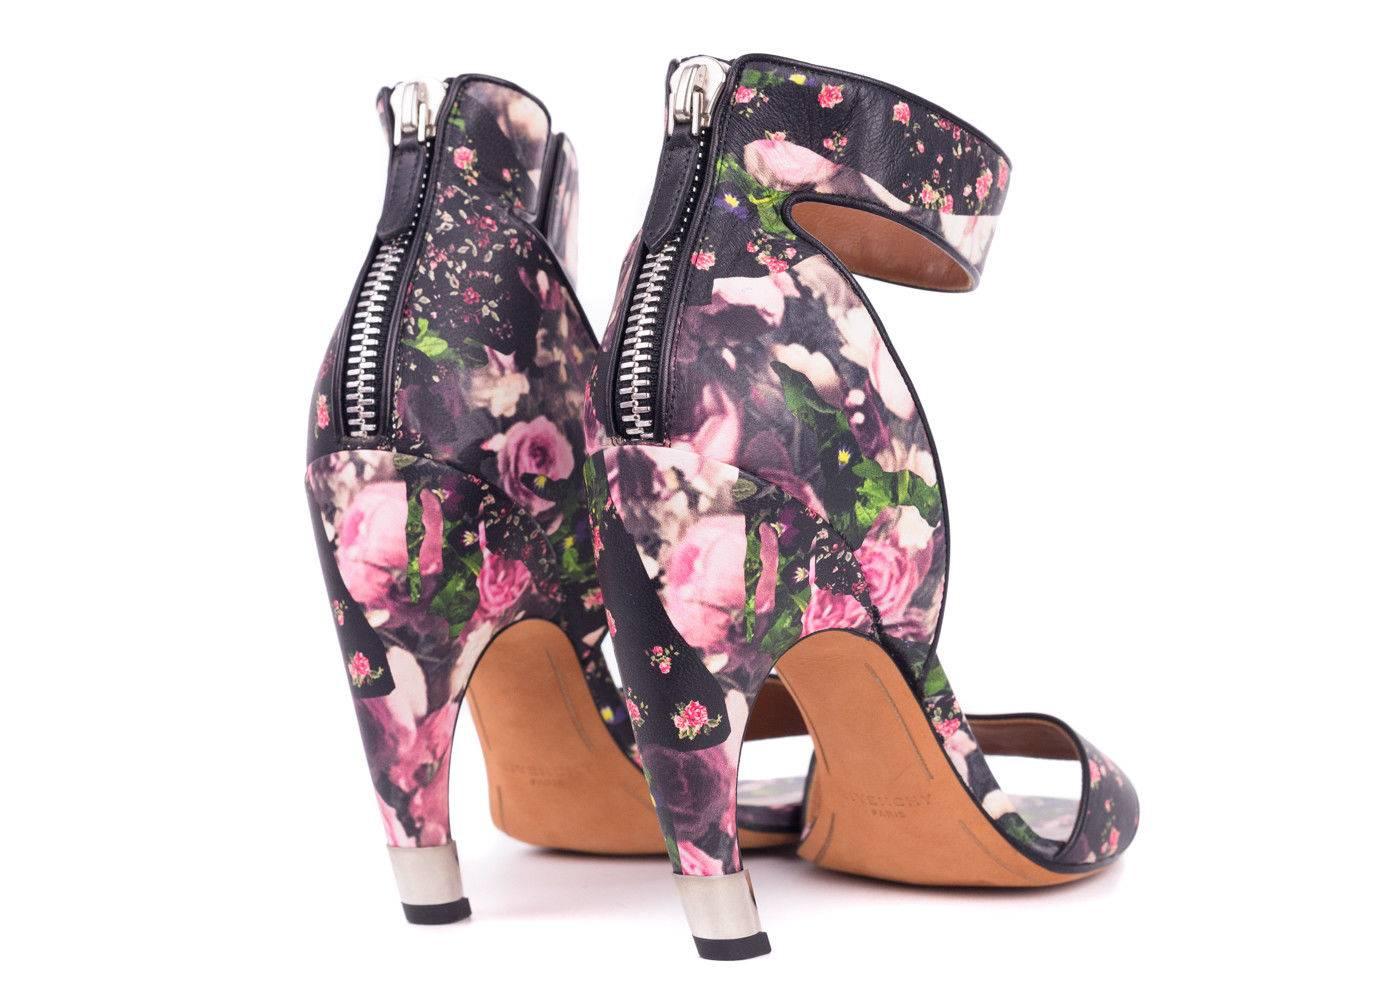 Givenchy Leather Floral Curved Heel D'Orsay Sandals In Excellent Condition For Sale In Brooklyn, NY